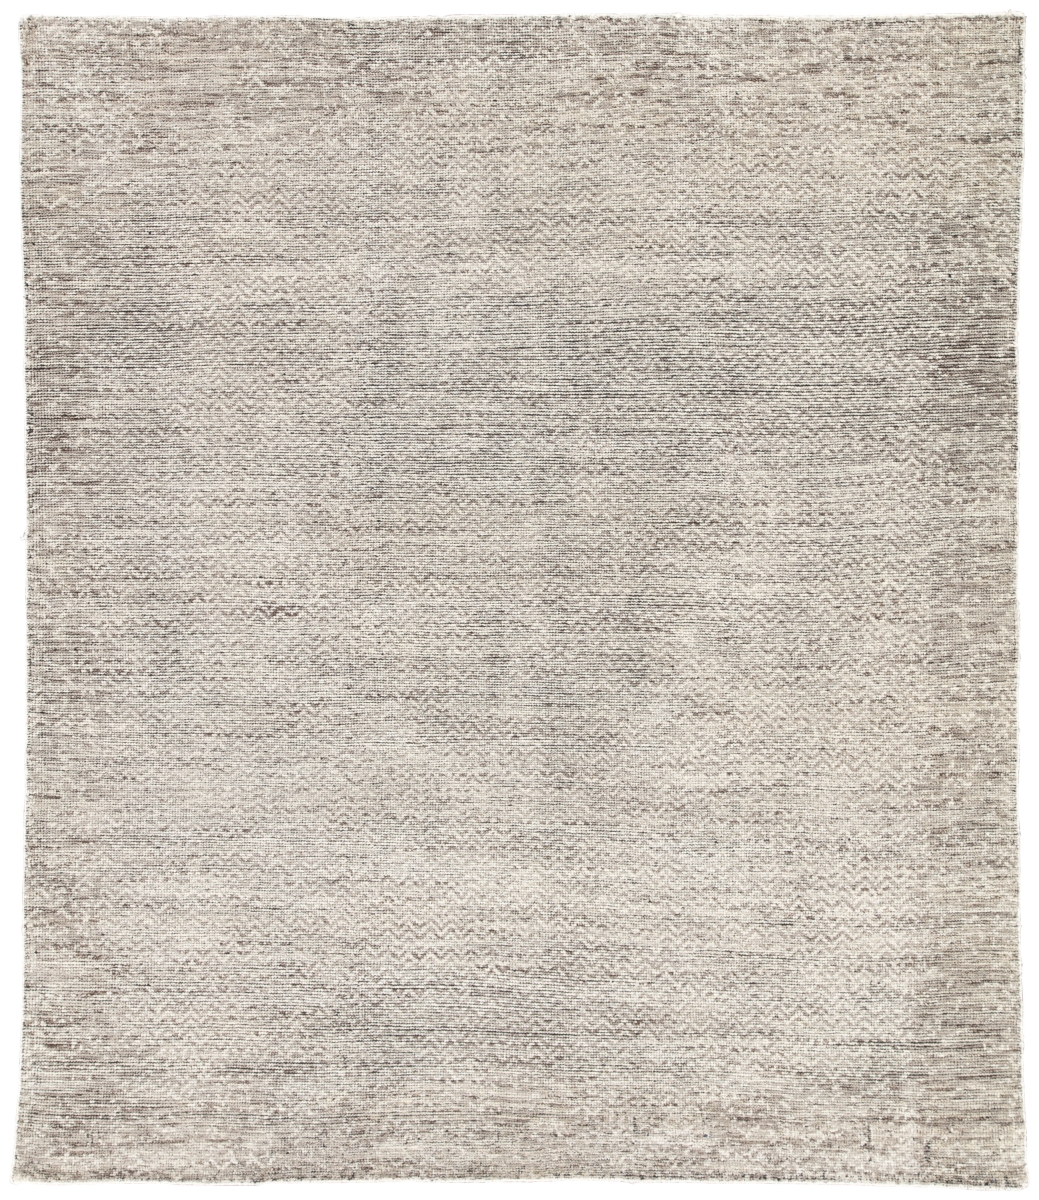 Rug138510 5 X 8 Ft. Rize Shervin Hand-knotted Chevron Dark Gray & Ivory Area Rug